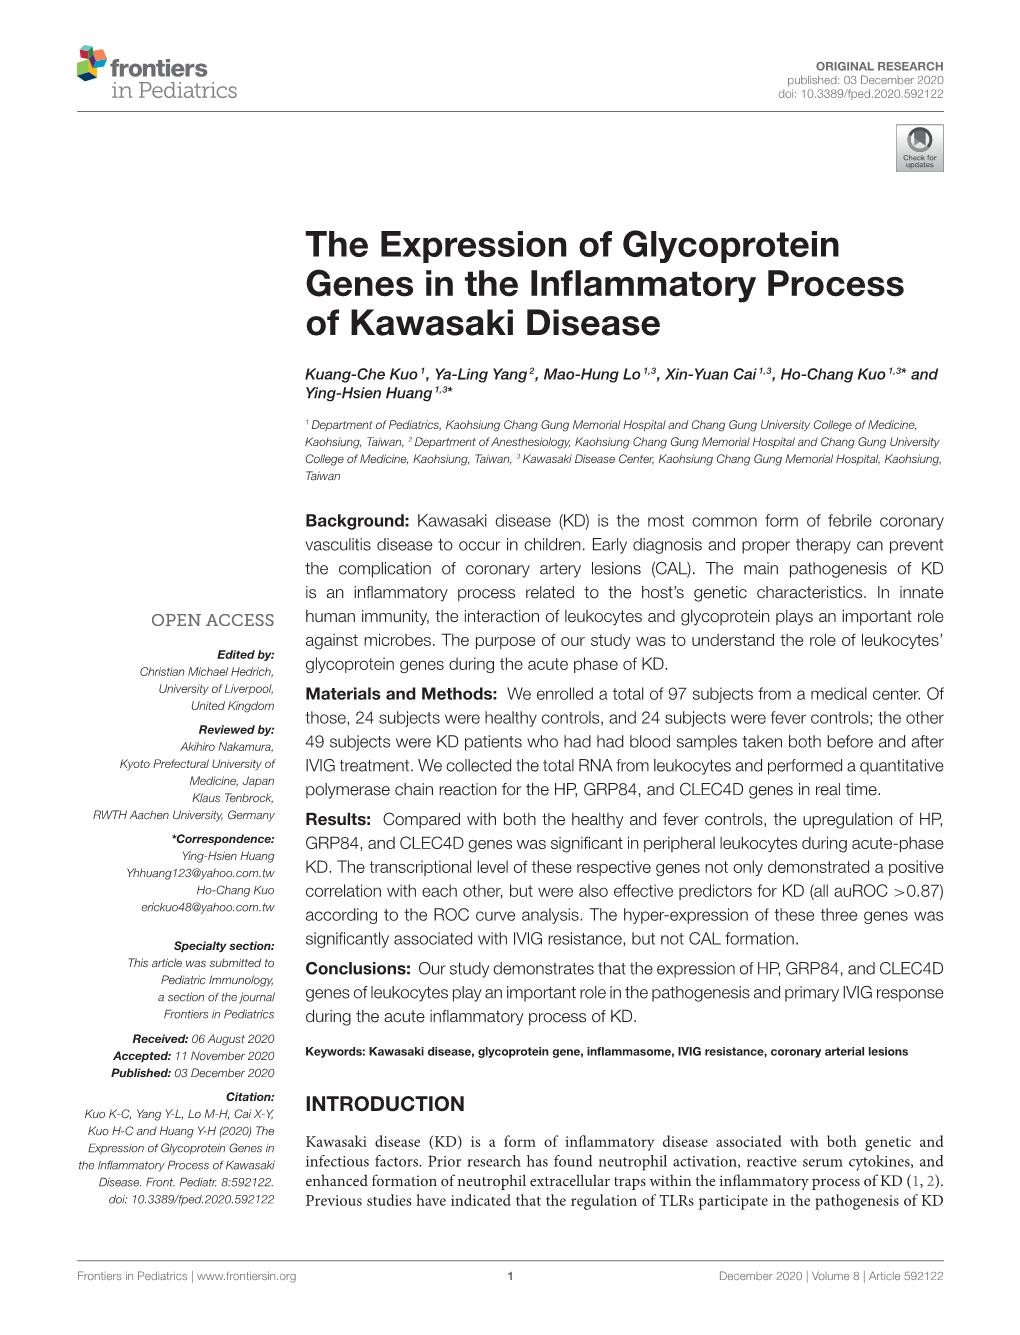 The Expression of Glycoprotein Genes in the Inflammatory Process Of